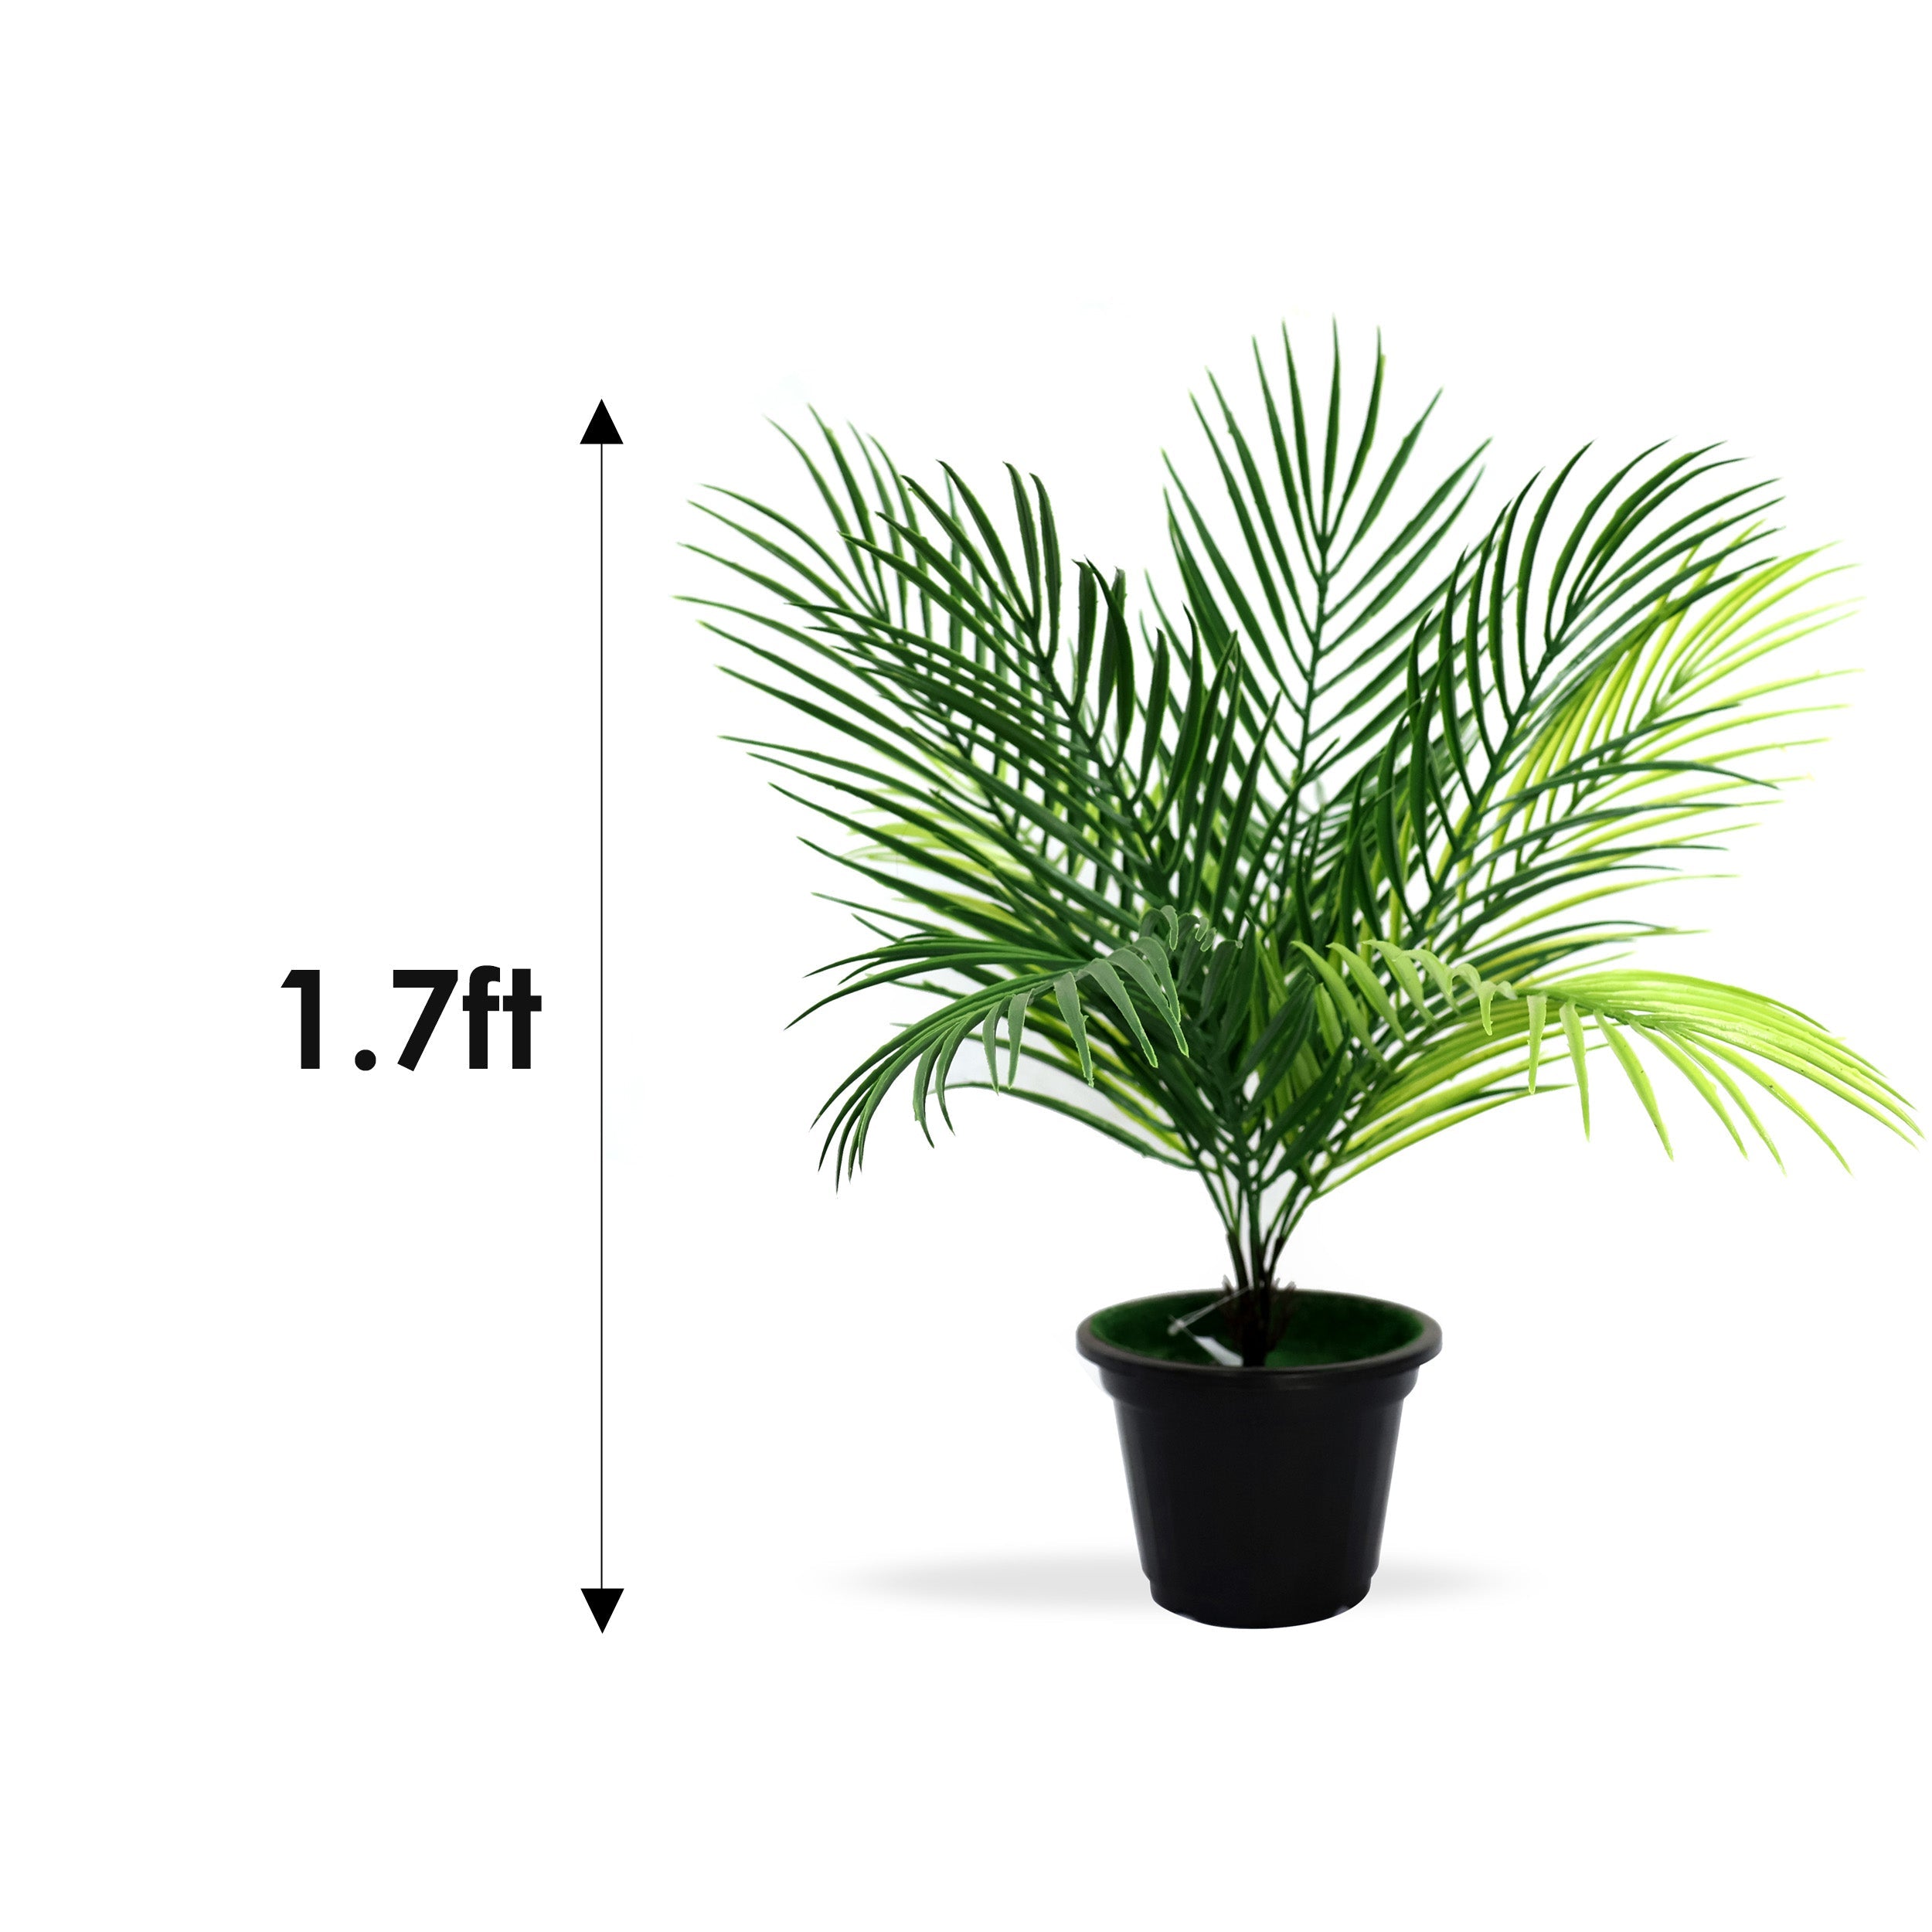 AAVANA GREENS 20" Artificial Plants in Pots Indoor and Outdoor for Home Wall Desk Bedroom Restaurant Decoration, Realistic Lush Green Leaves